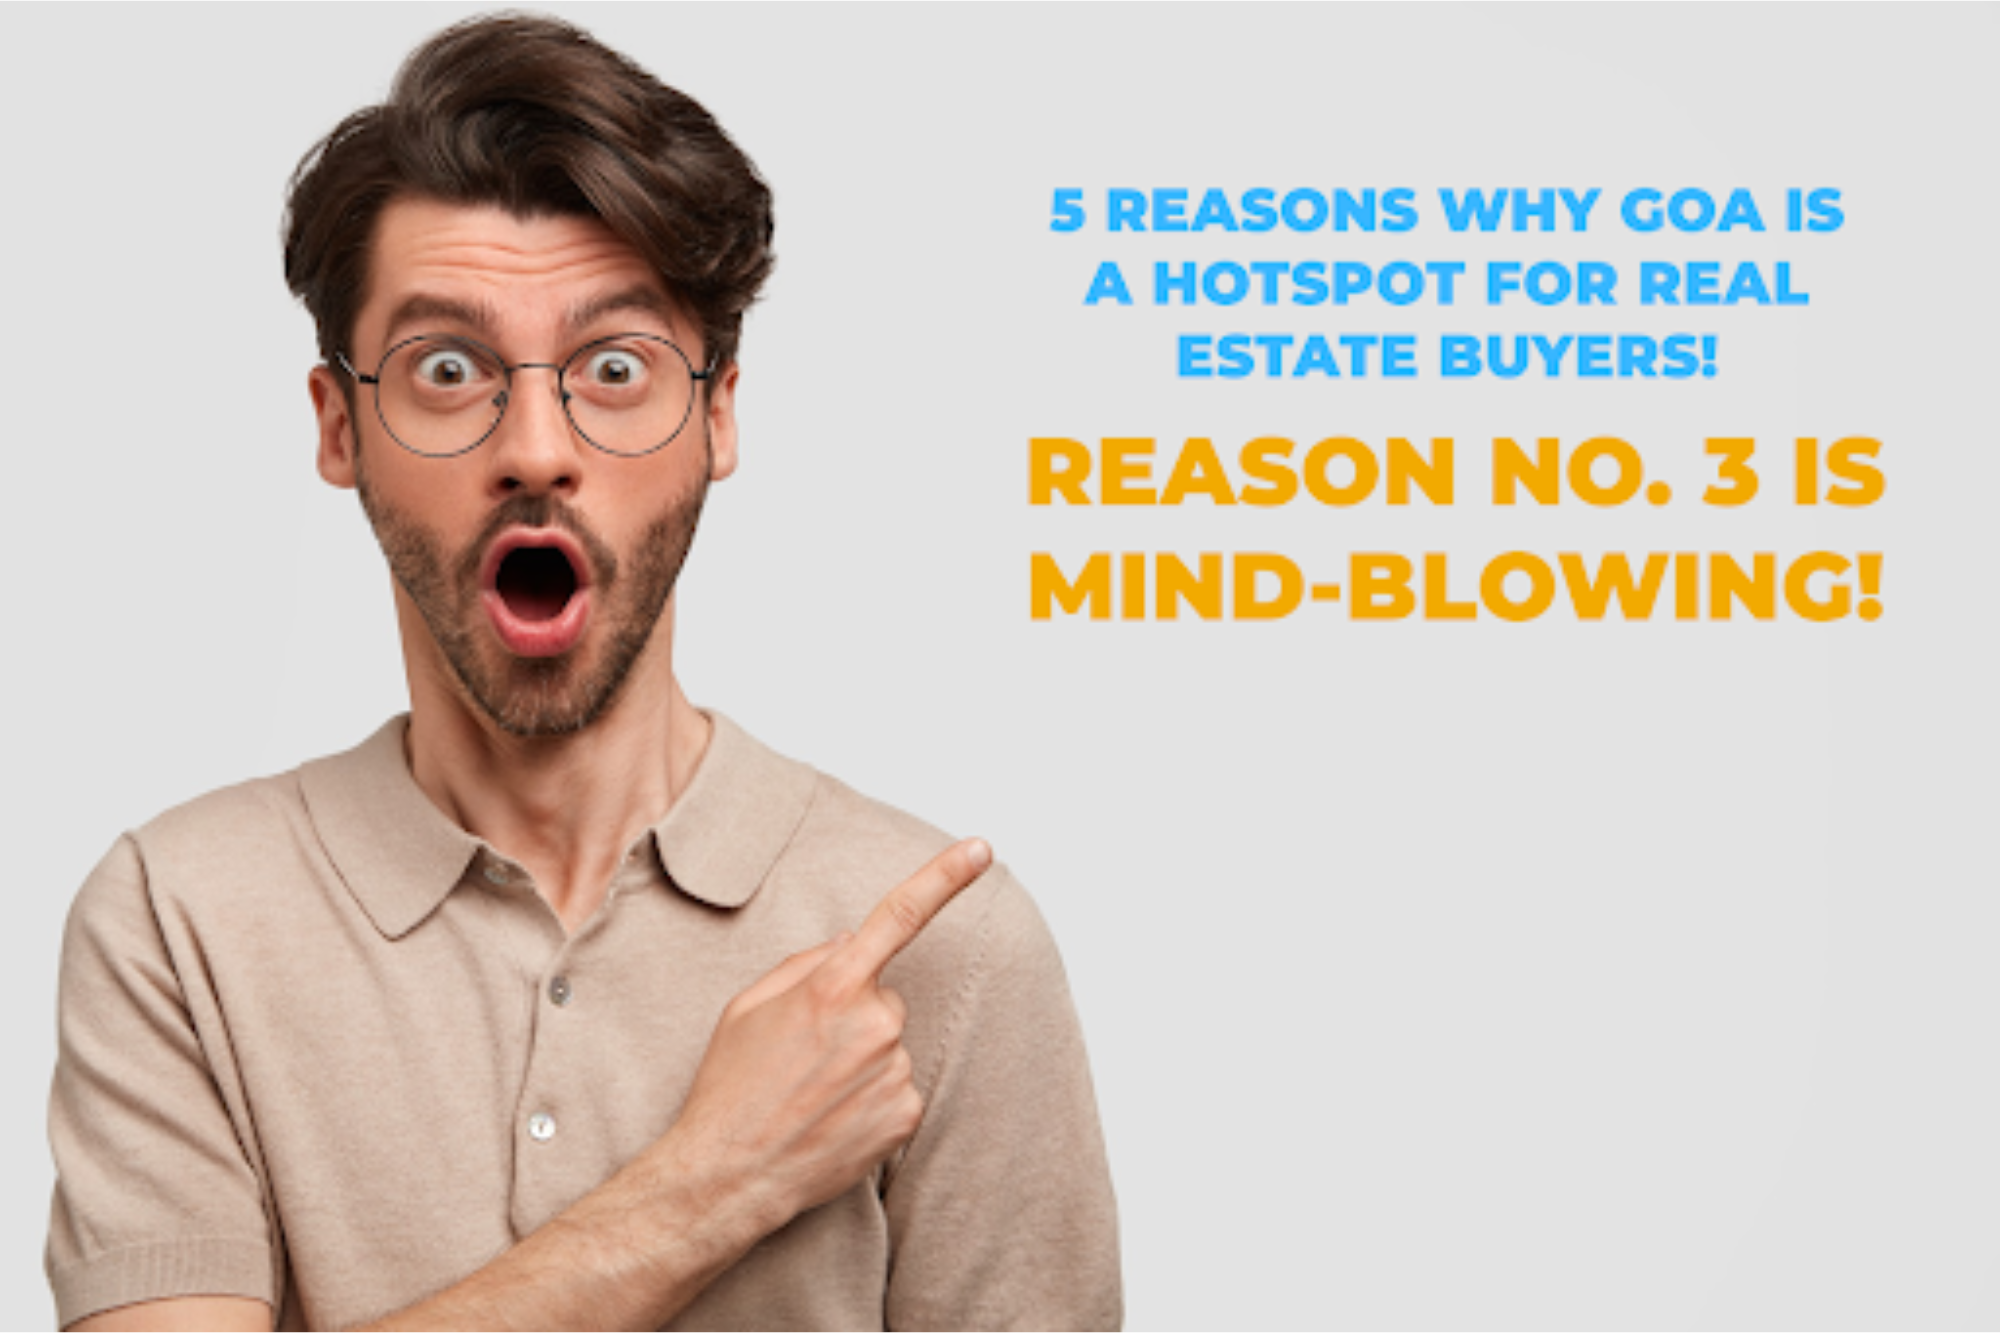 5 Reasons Why Goa is a Hotspot for Real Estate Buyers!  Reason No. 3 is Mind-Blowing!